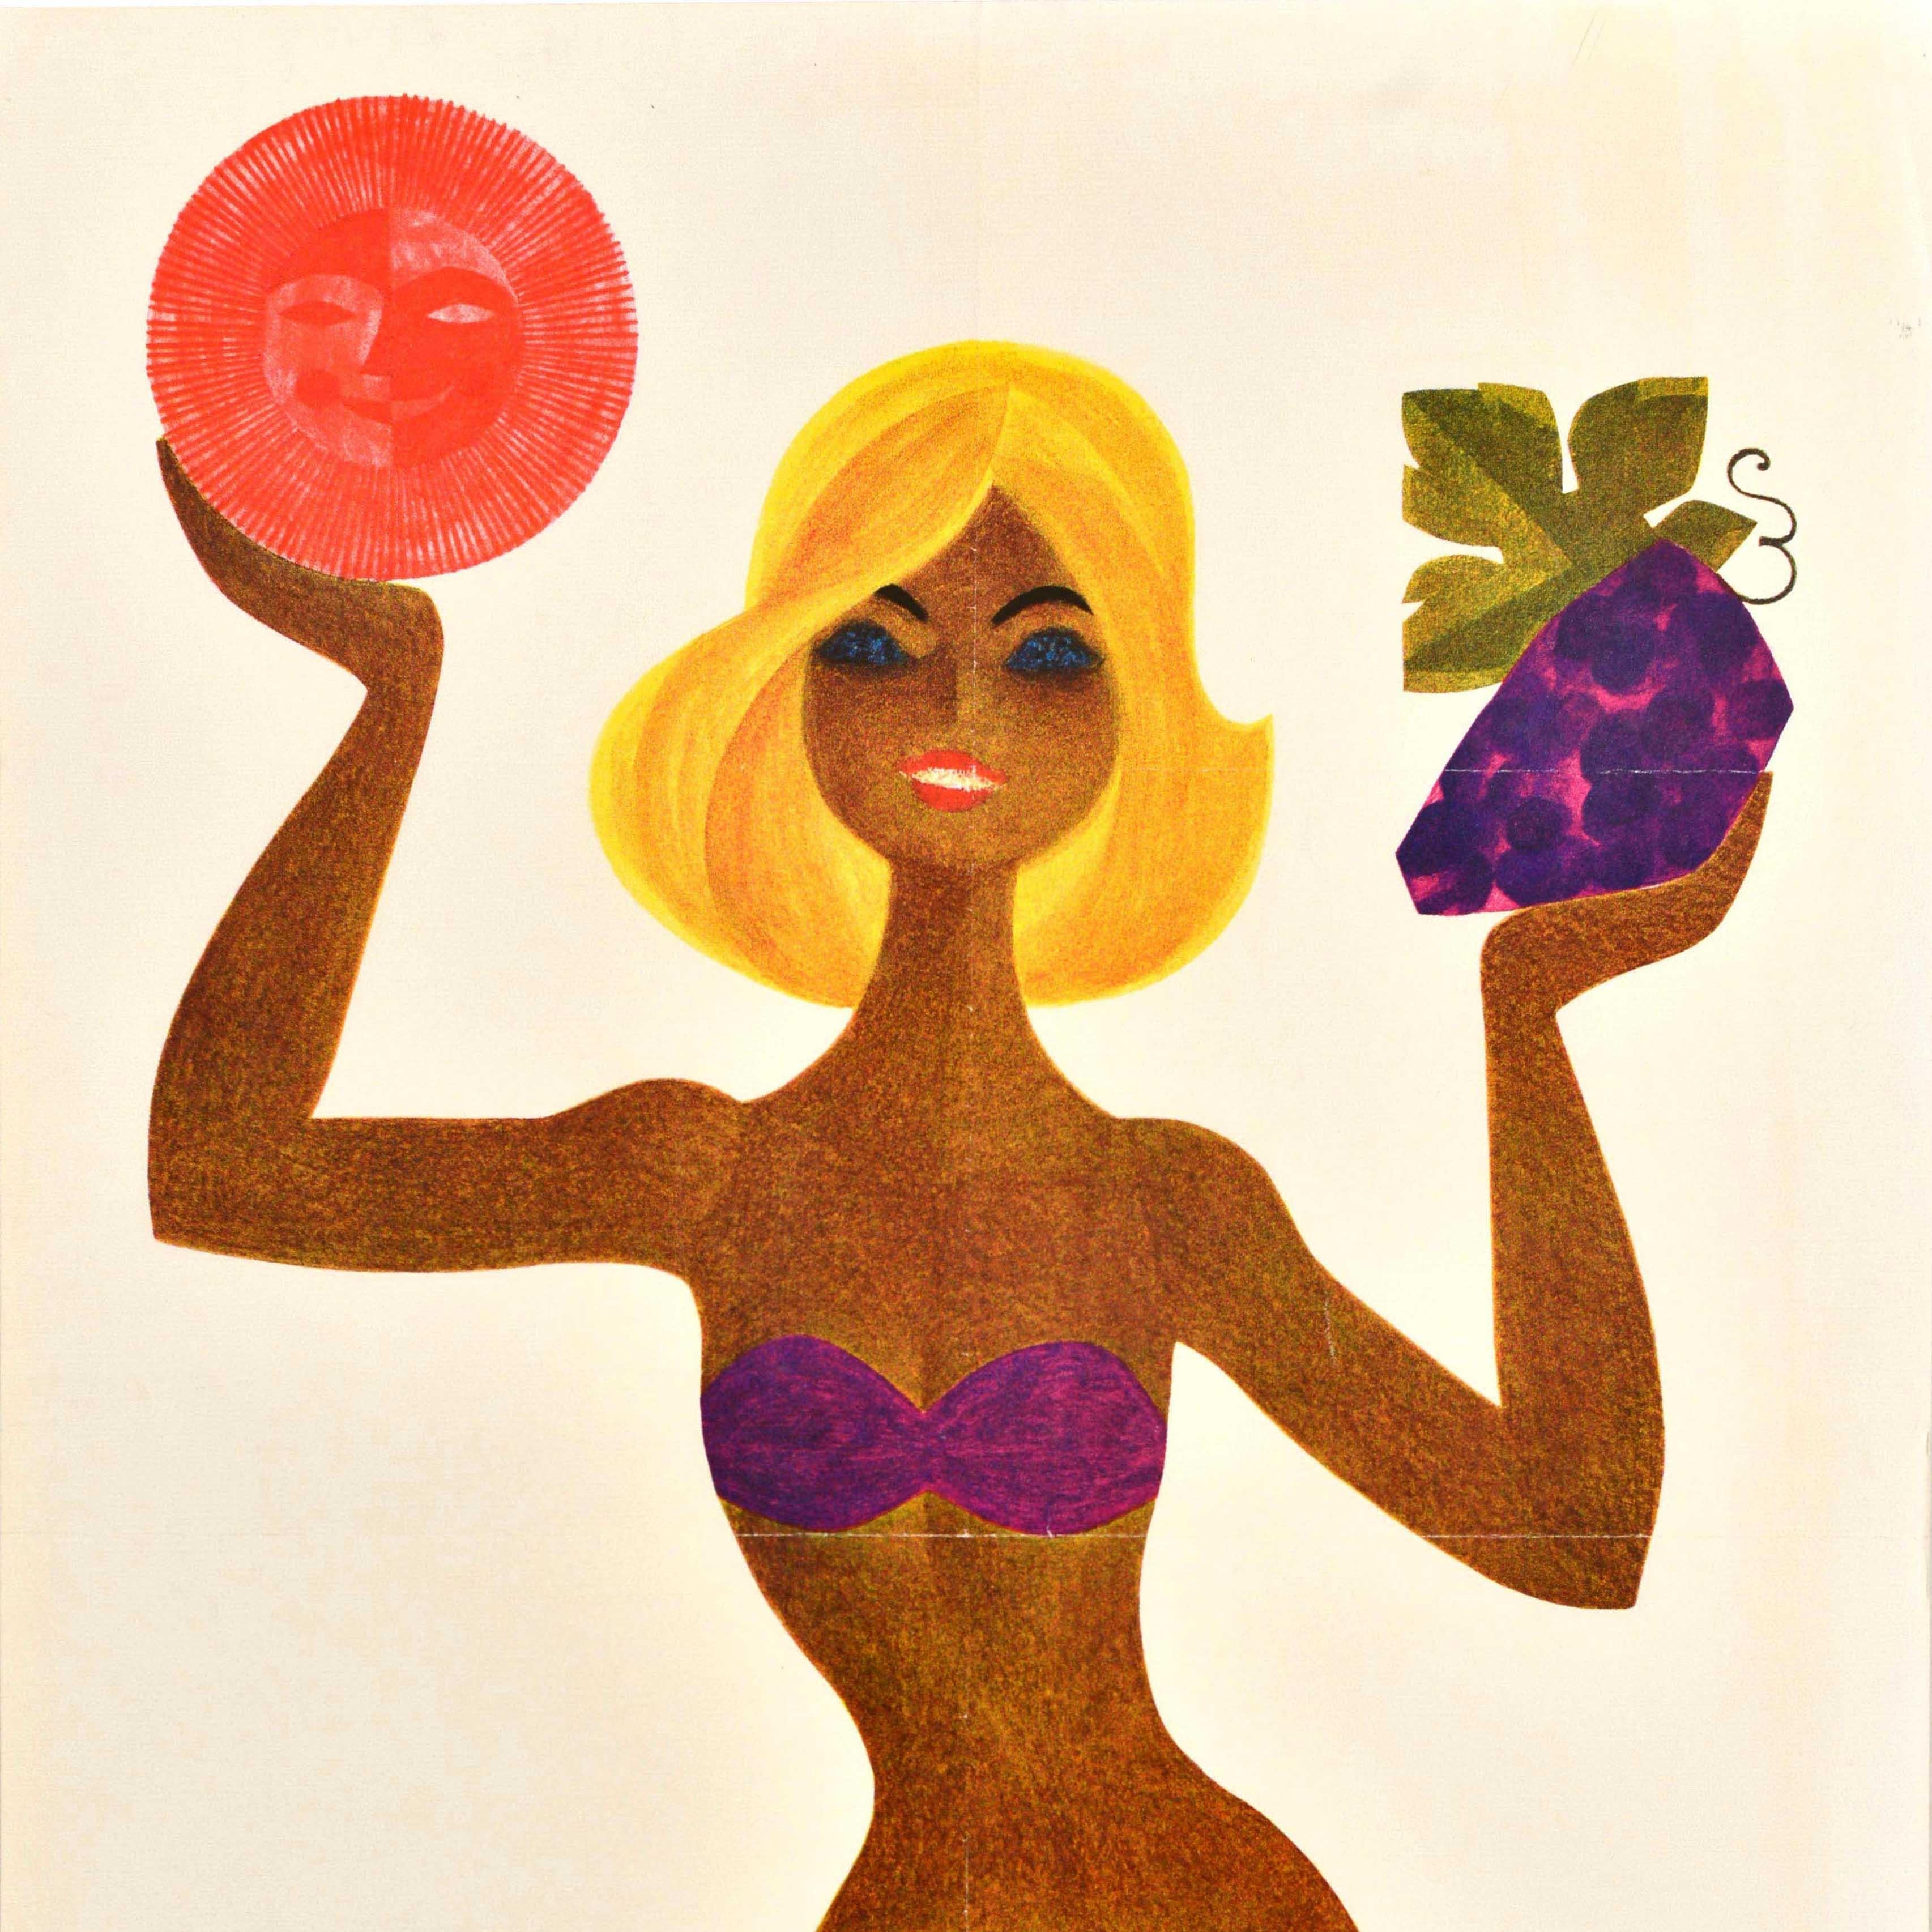 Original vintage travel poster issued by the Soviet travel agency Intourist featuring a great image of a sun tanned lady in a bikini holding up a smiling sun in one hand and a bunch of grapes in the other with a fish swimming in the clear blue sea